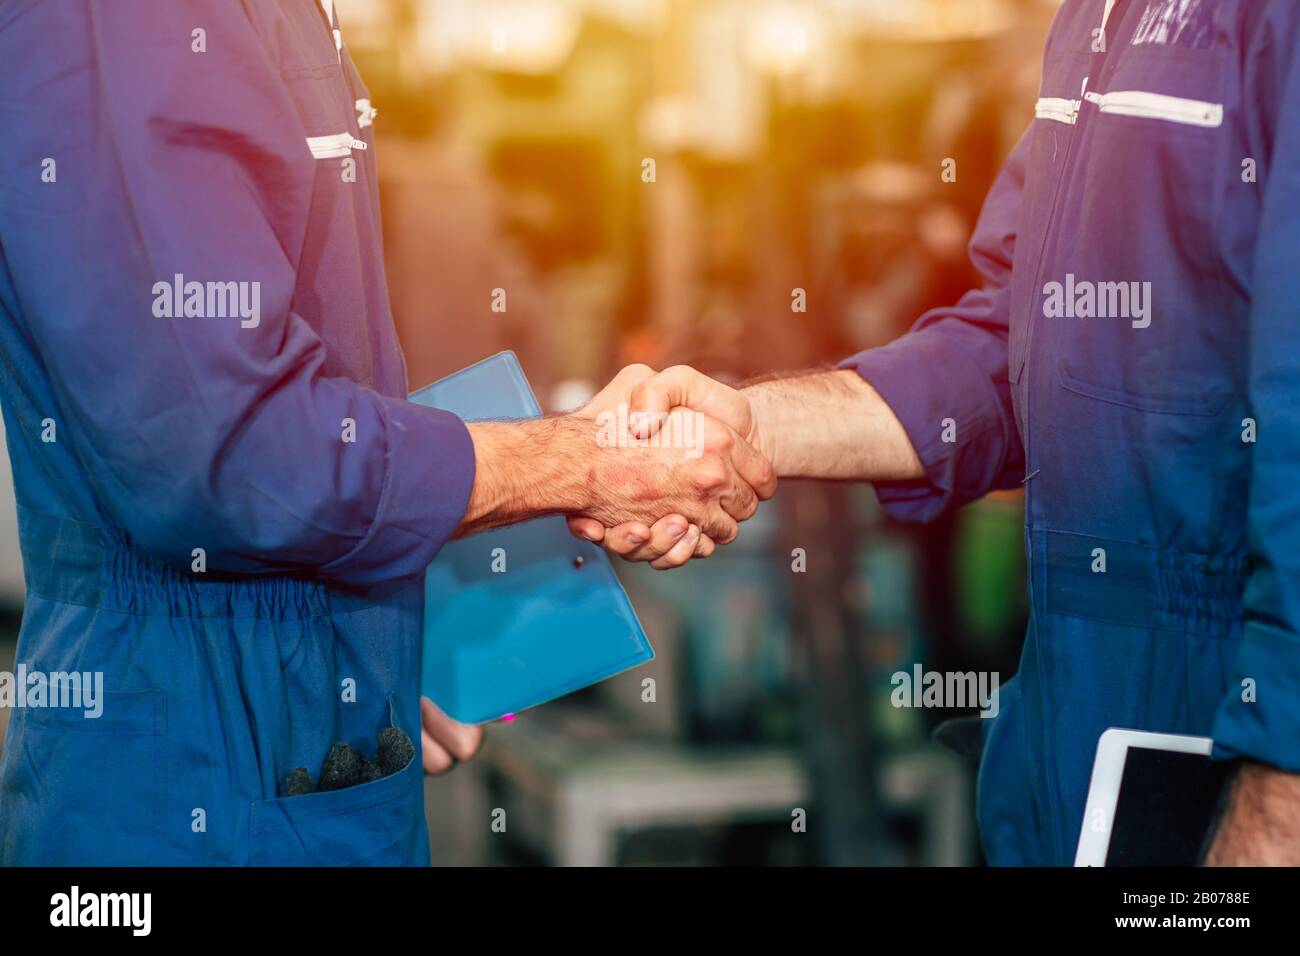 Worker team hand shaking to co-operated the factory engineer work or dealing job done. Stock Photo